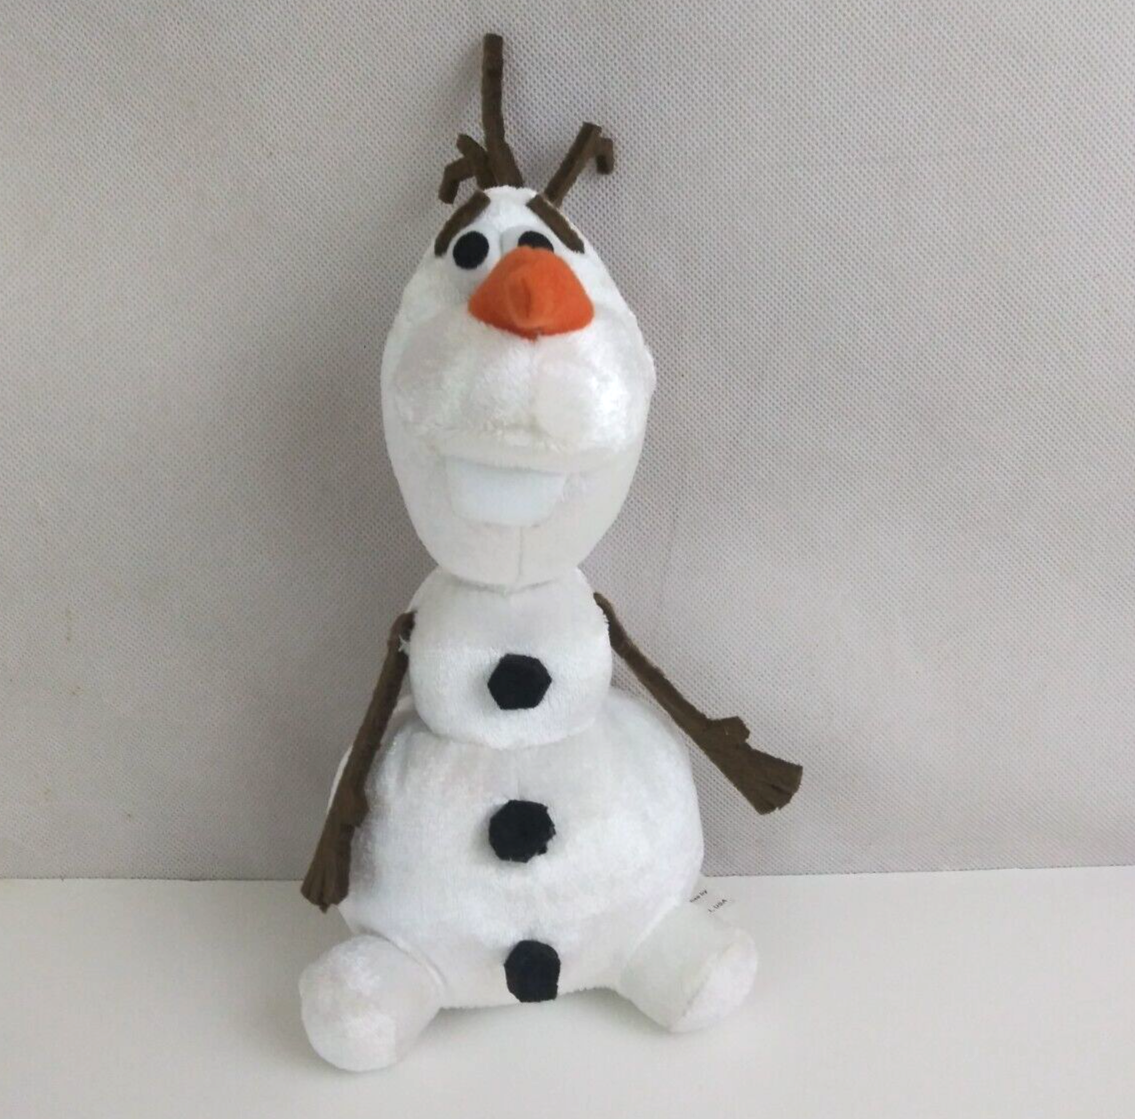 Primary image for Just Play Disney Frozen Olaf 7.5" Collectible Plush